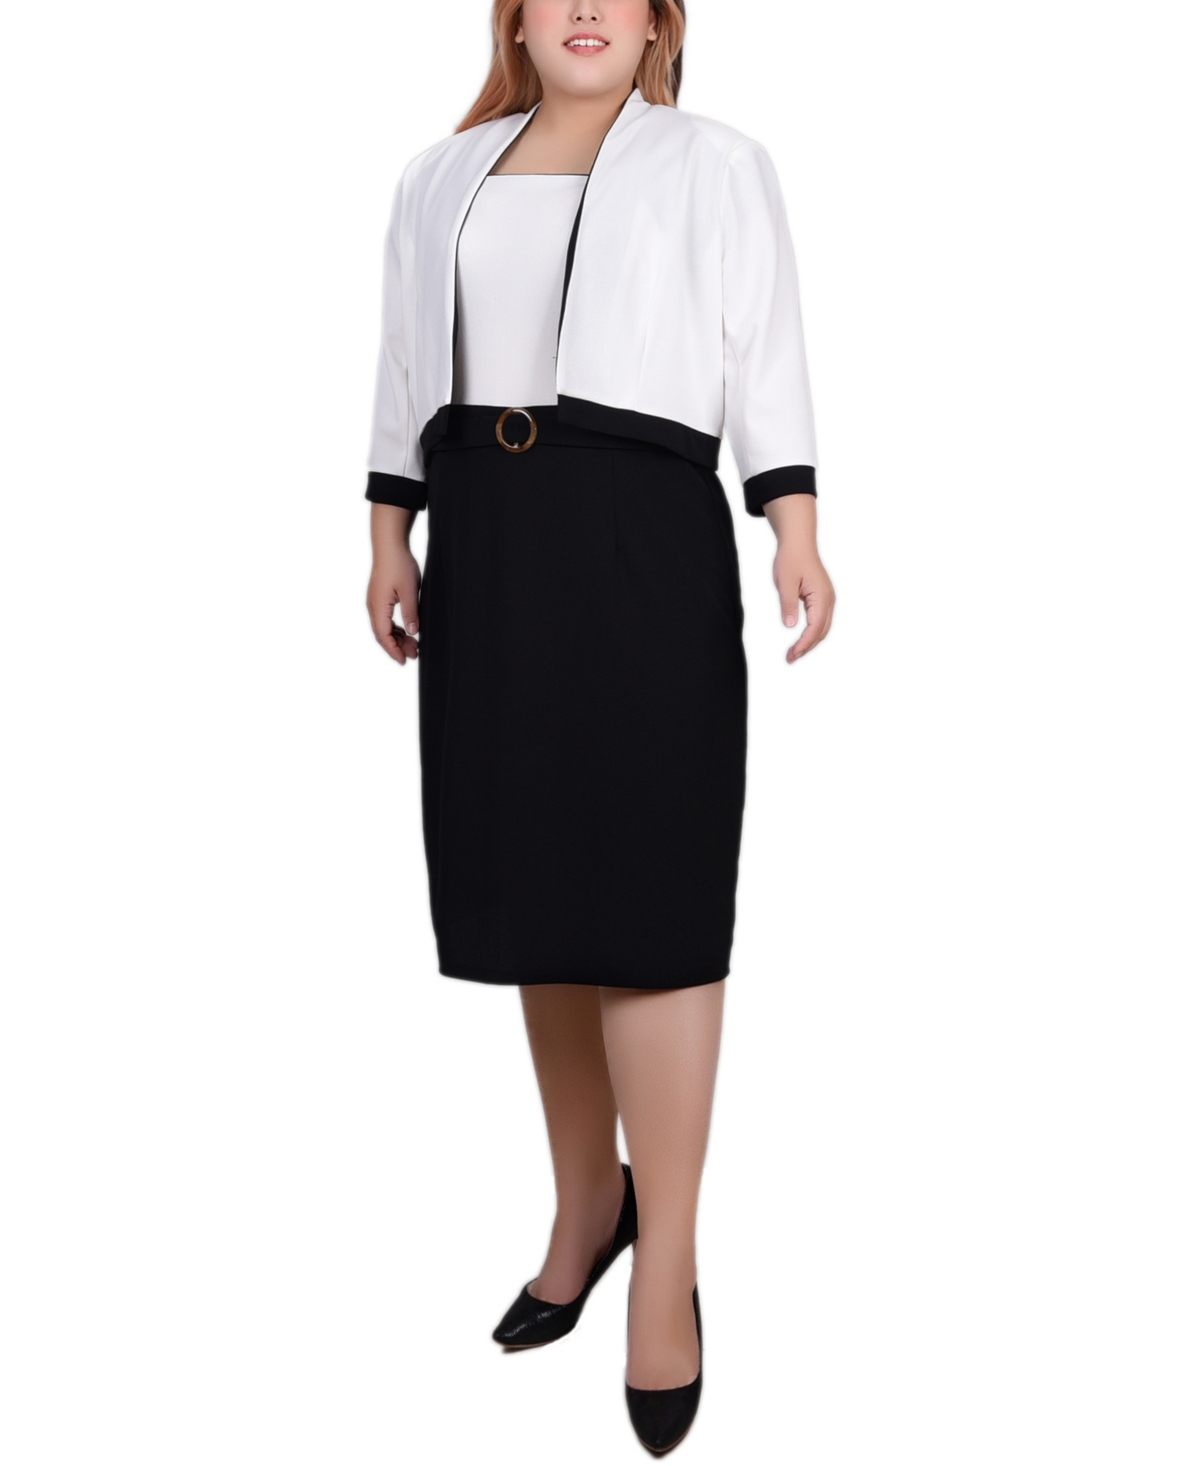 NY COLLECTION PLUS SIZE 3/4 SLEEVE COLORBLOCKED DRESS, 2 PIECE SET